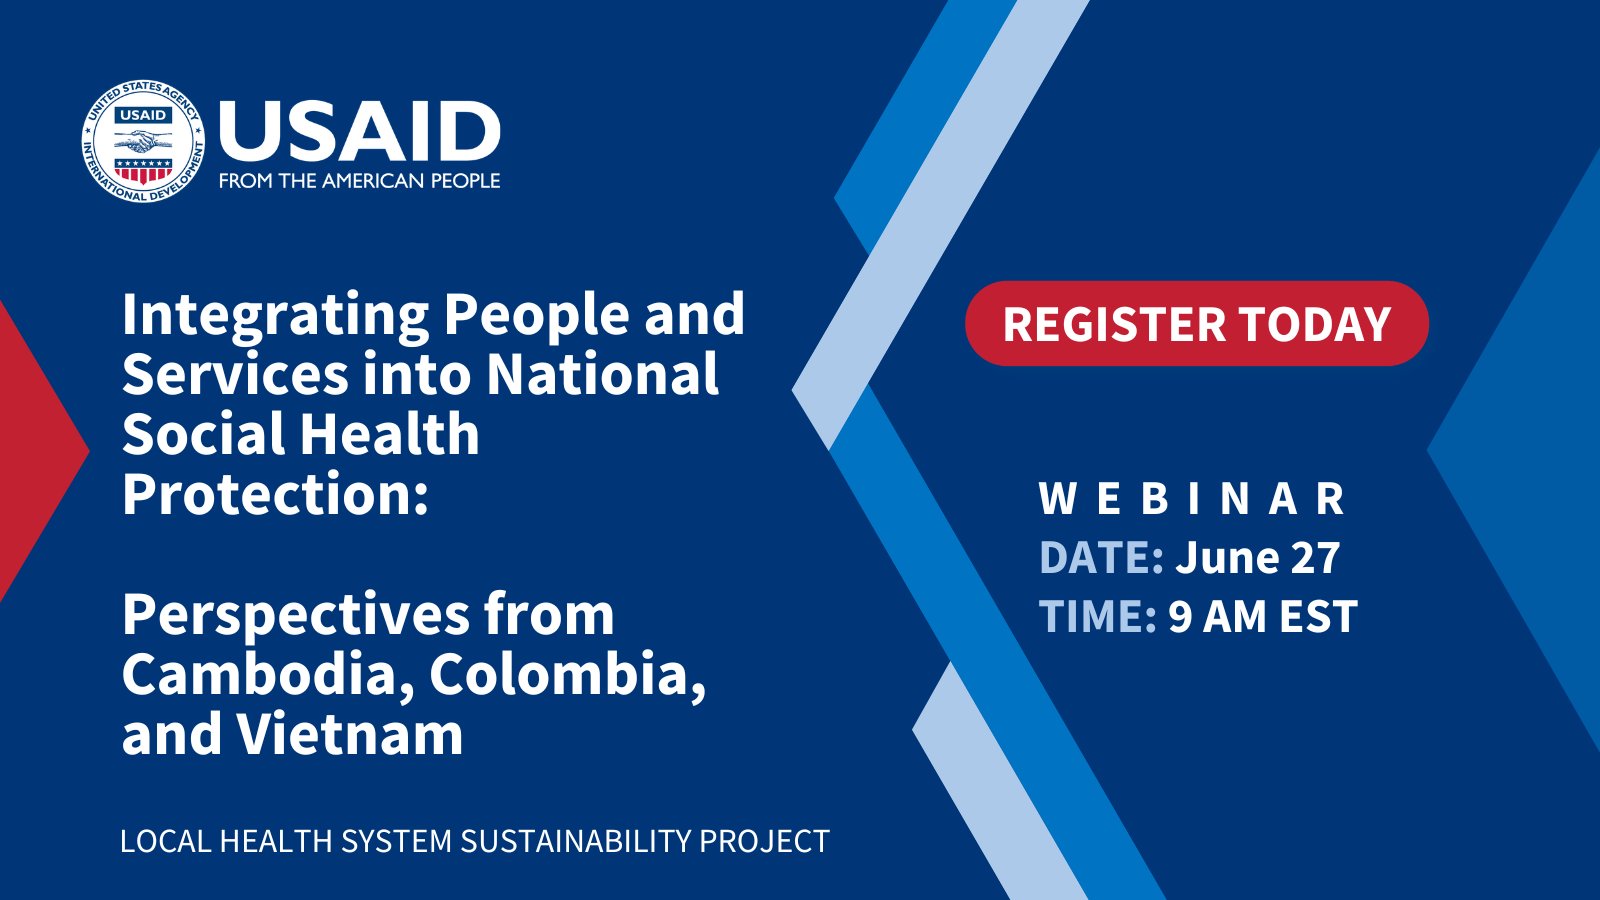 LHSS Webinar: Integrating People and Services into National Social Health Protection, Perspectives from Cambodia, Colombia, and Vietnam